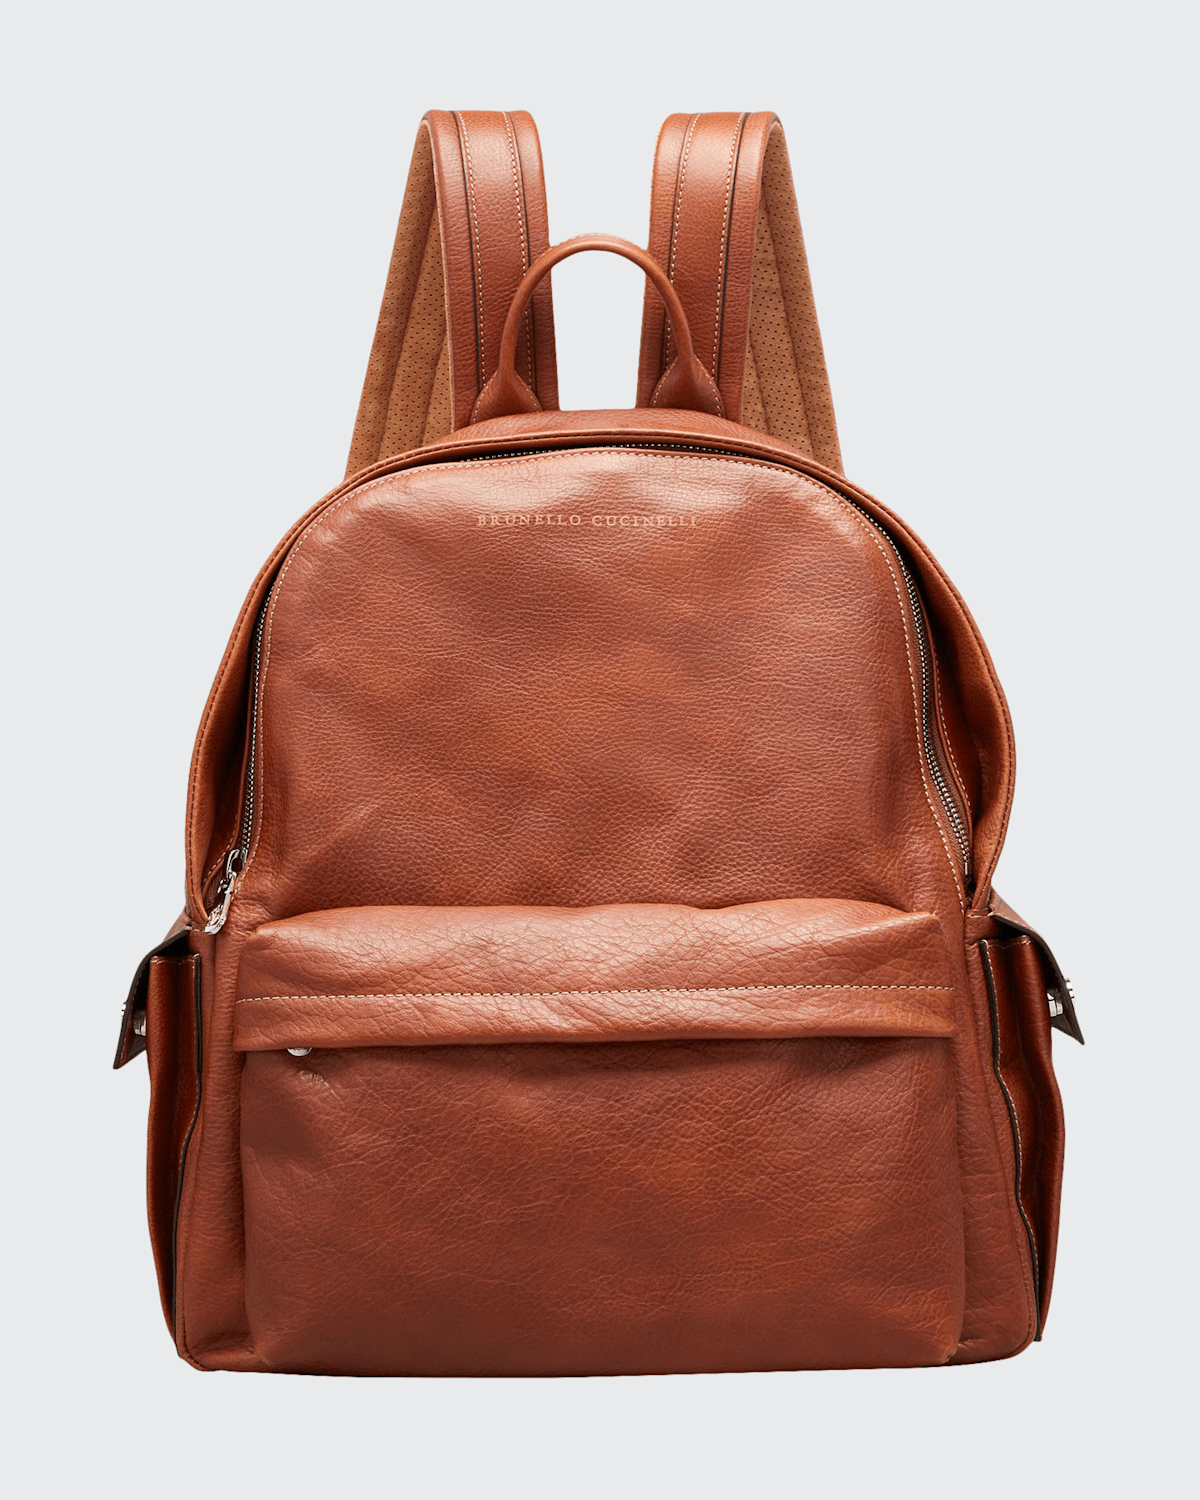 Brunello Cucinelli Men's Grained Leather Backpack